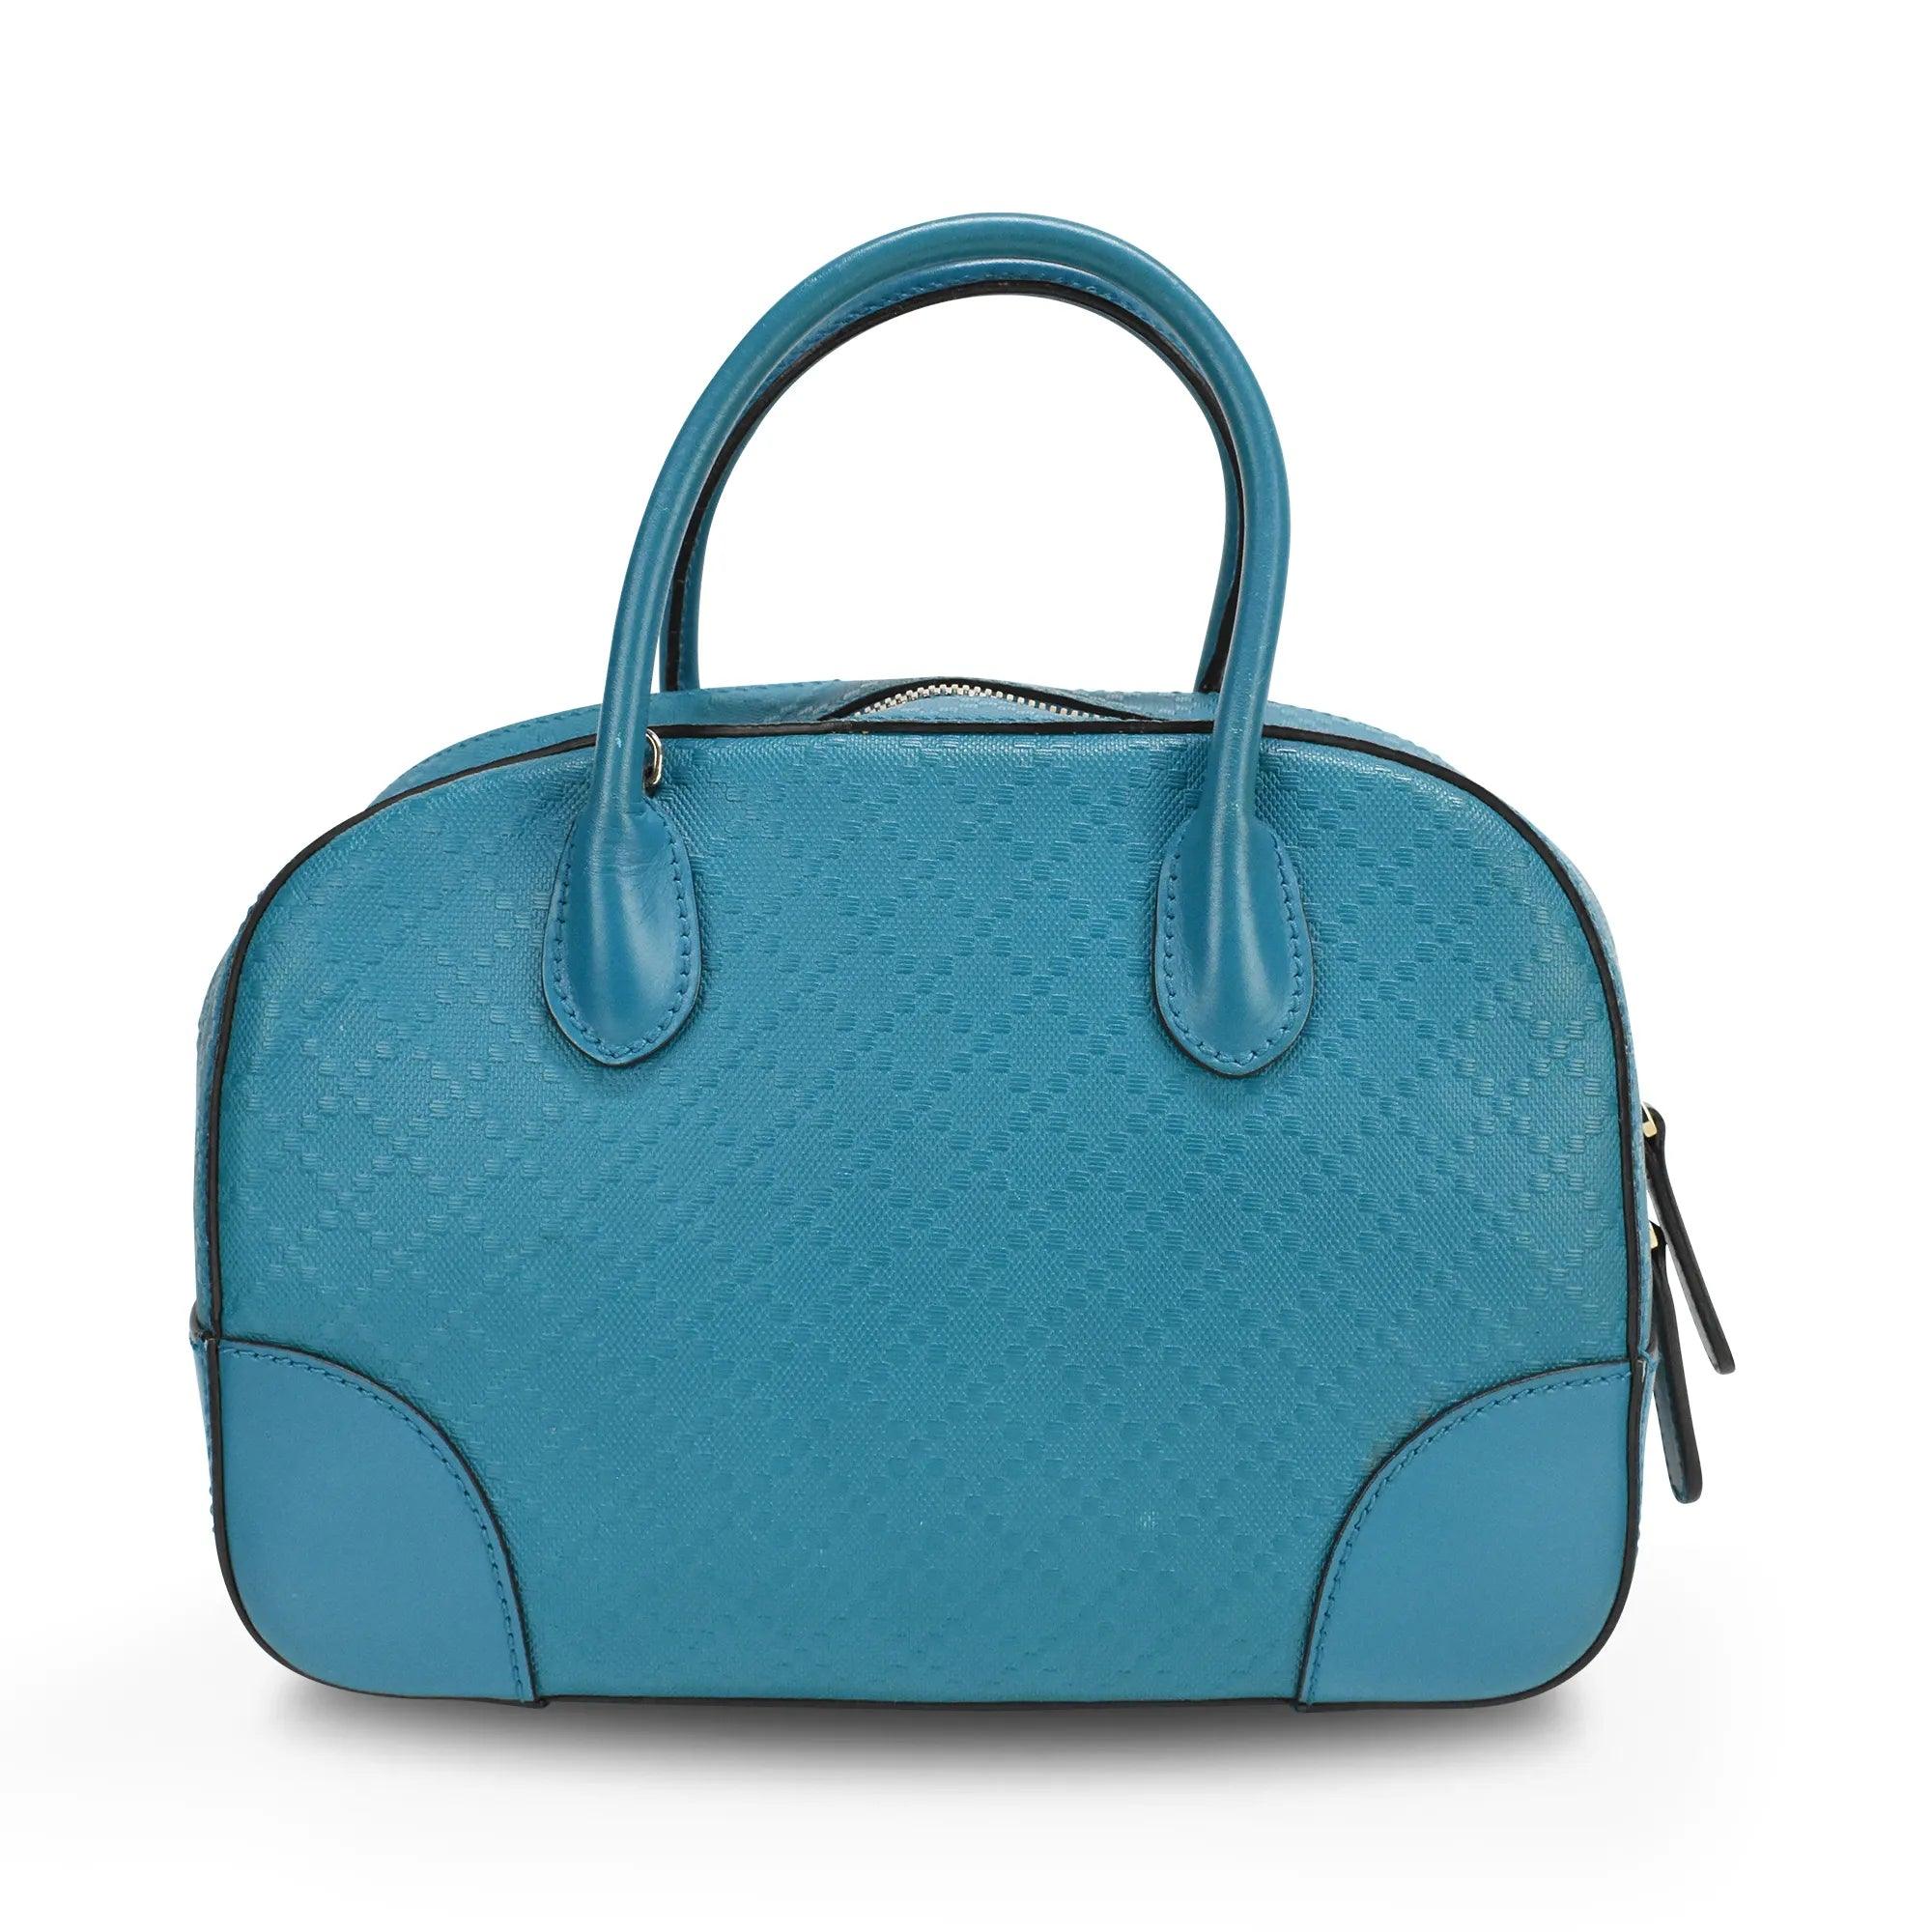 Gucci 'Satchel Small' Bag - Fashionably Yours